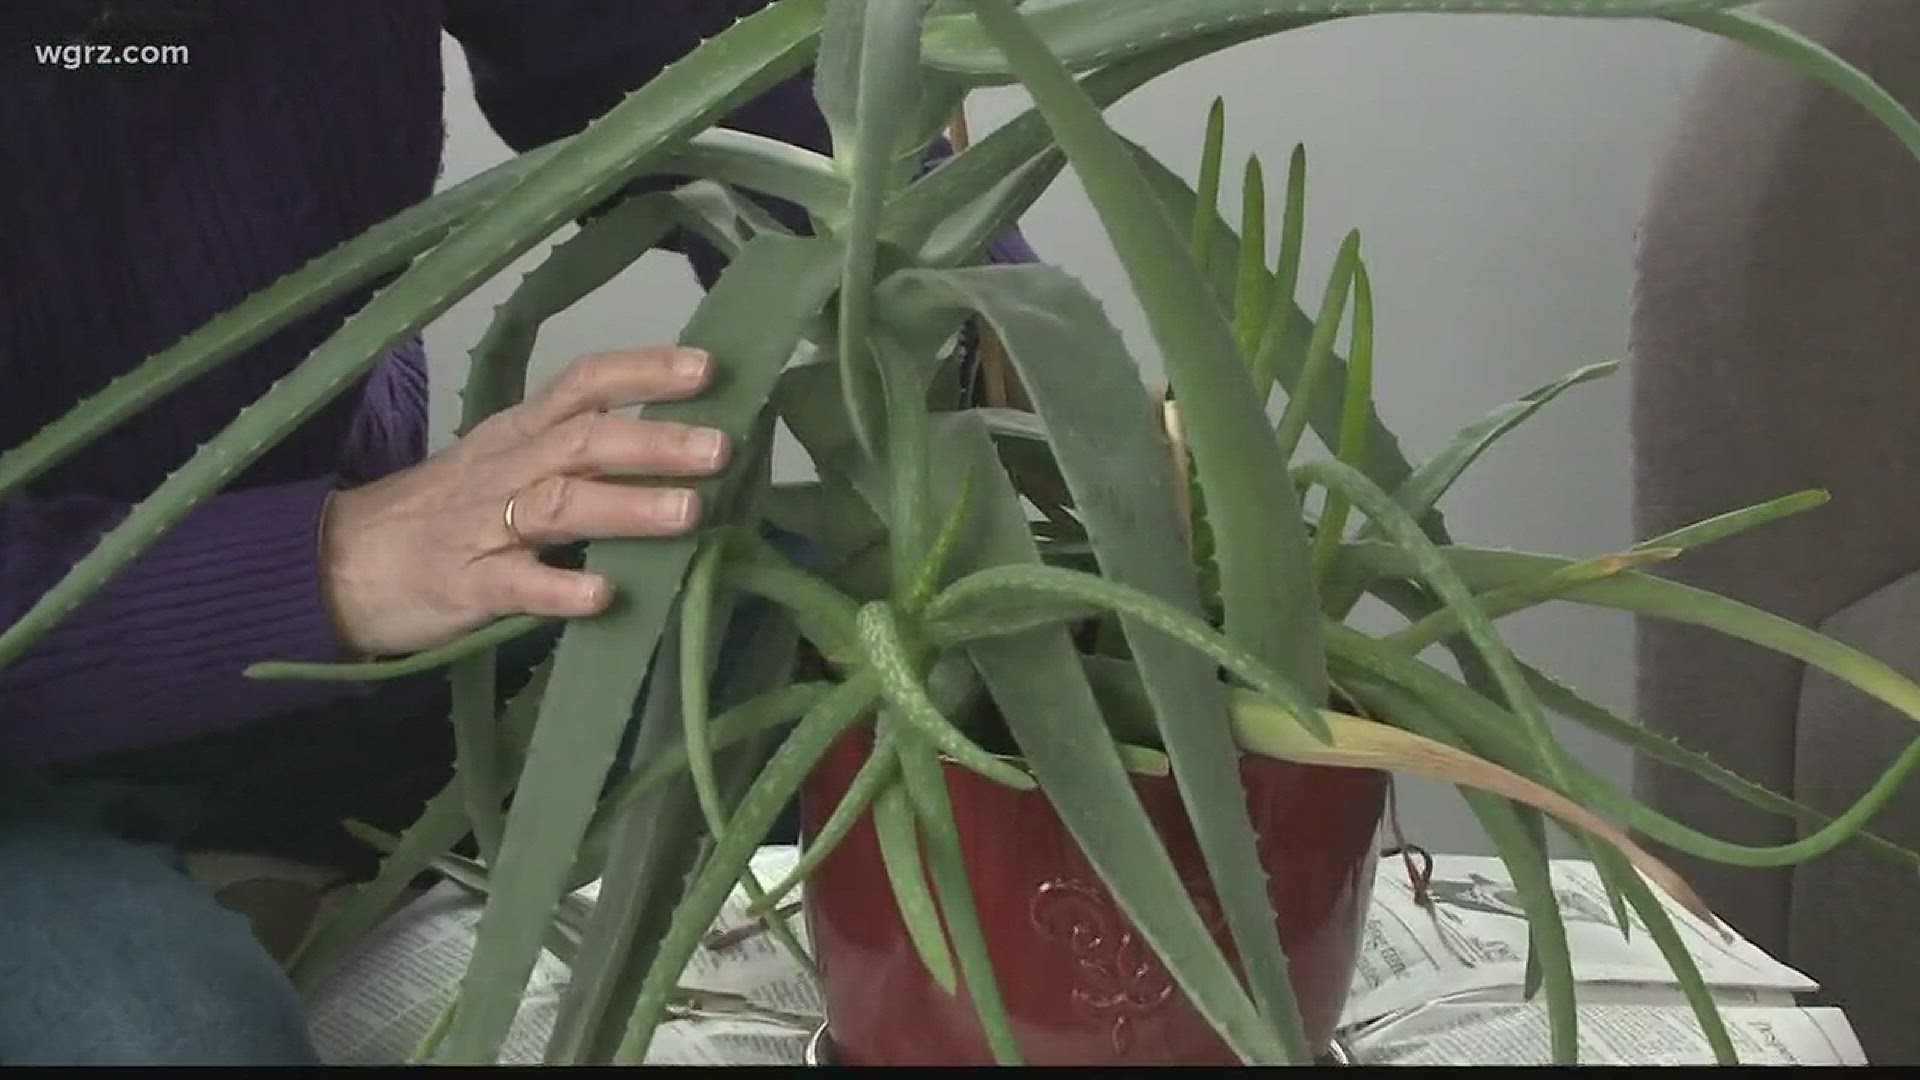 In this week's "2 the Garden," Jackie shows us how to take care of aloe vera plants.